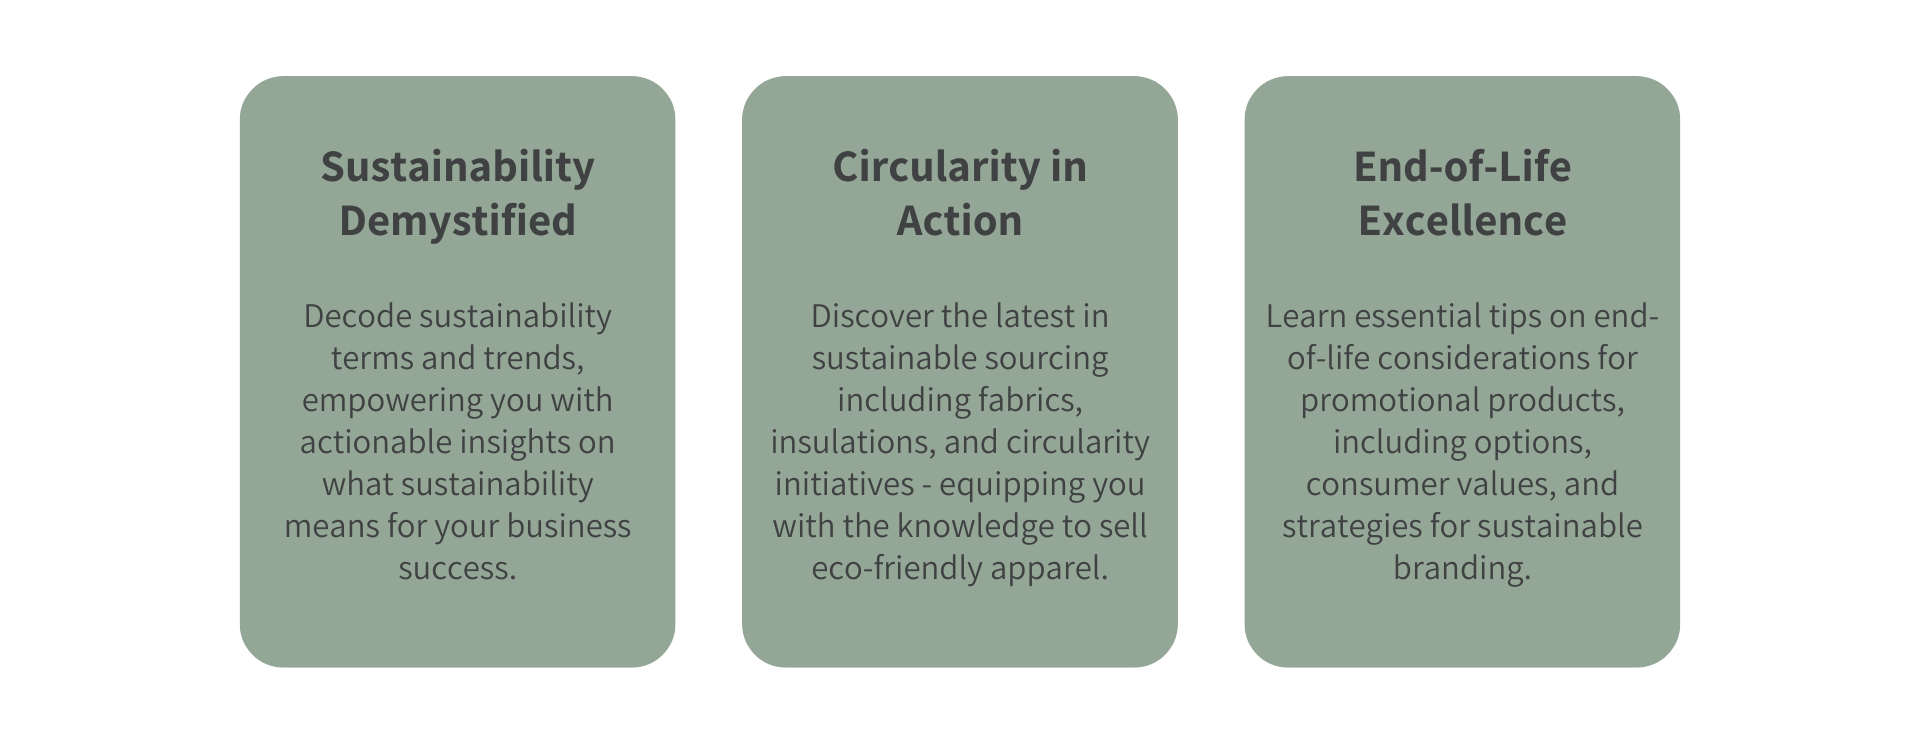 Sustainabiity Demystified, Circularity in Action, End-of-Life Excellence